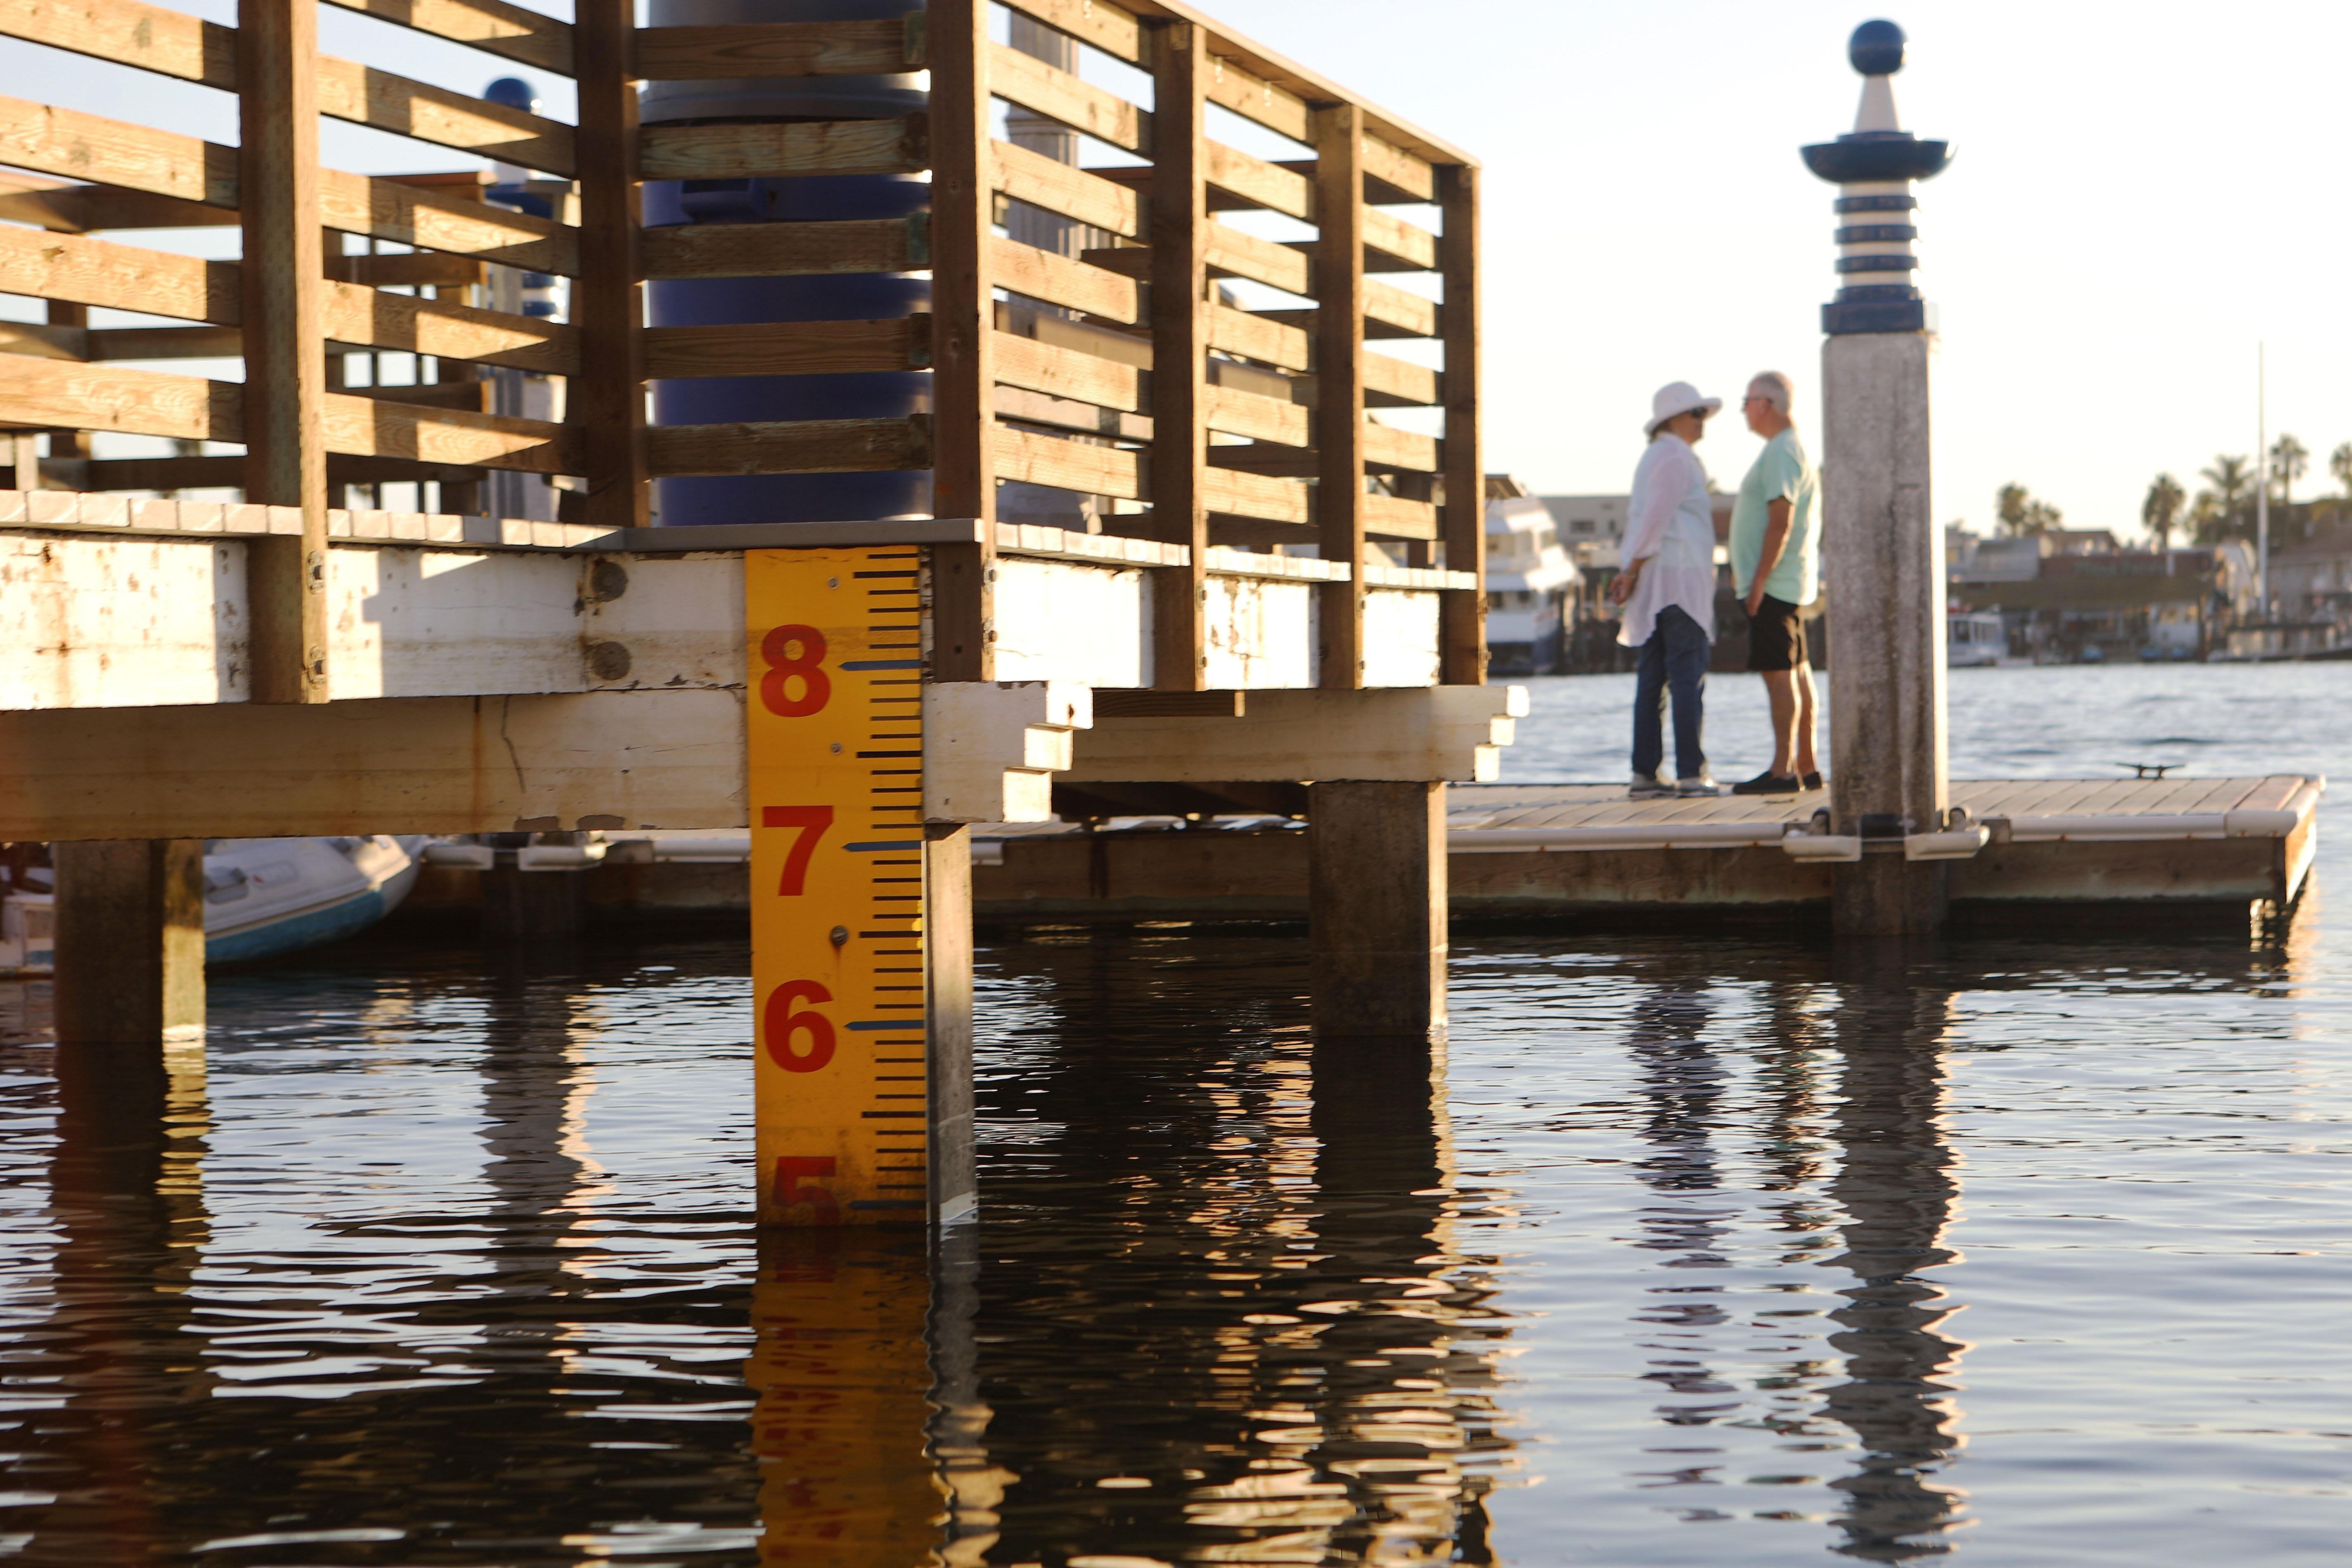 At a dock, water hits a water level marker at about 5 feet. Two people stand on the dock in the background.